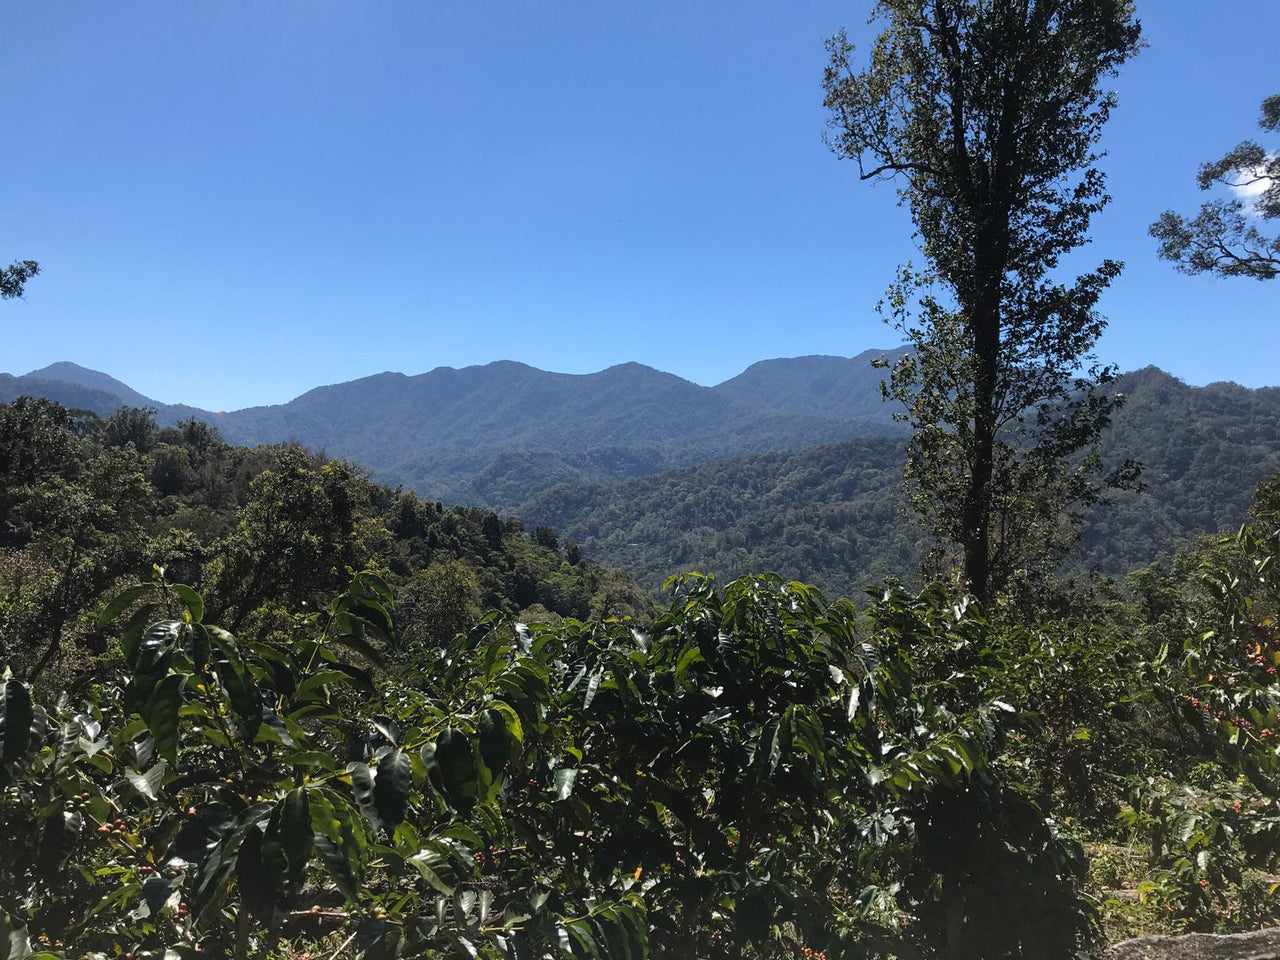 Redhawk Coffee Roasters Coffee farm photo with mountains and beautiful landscape